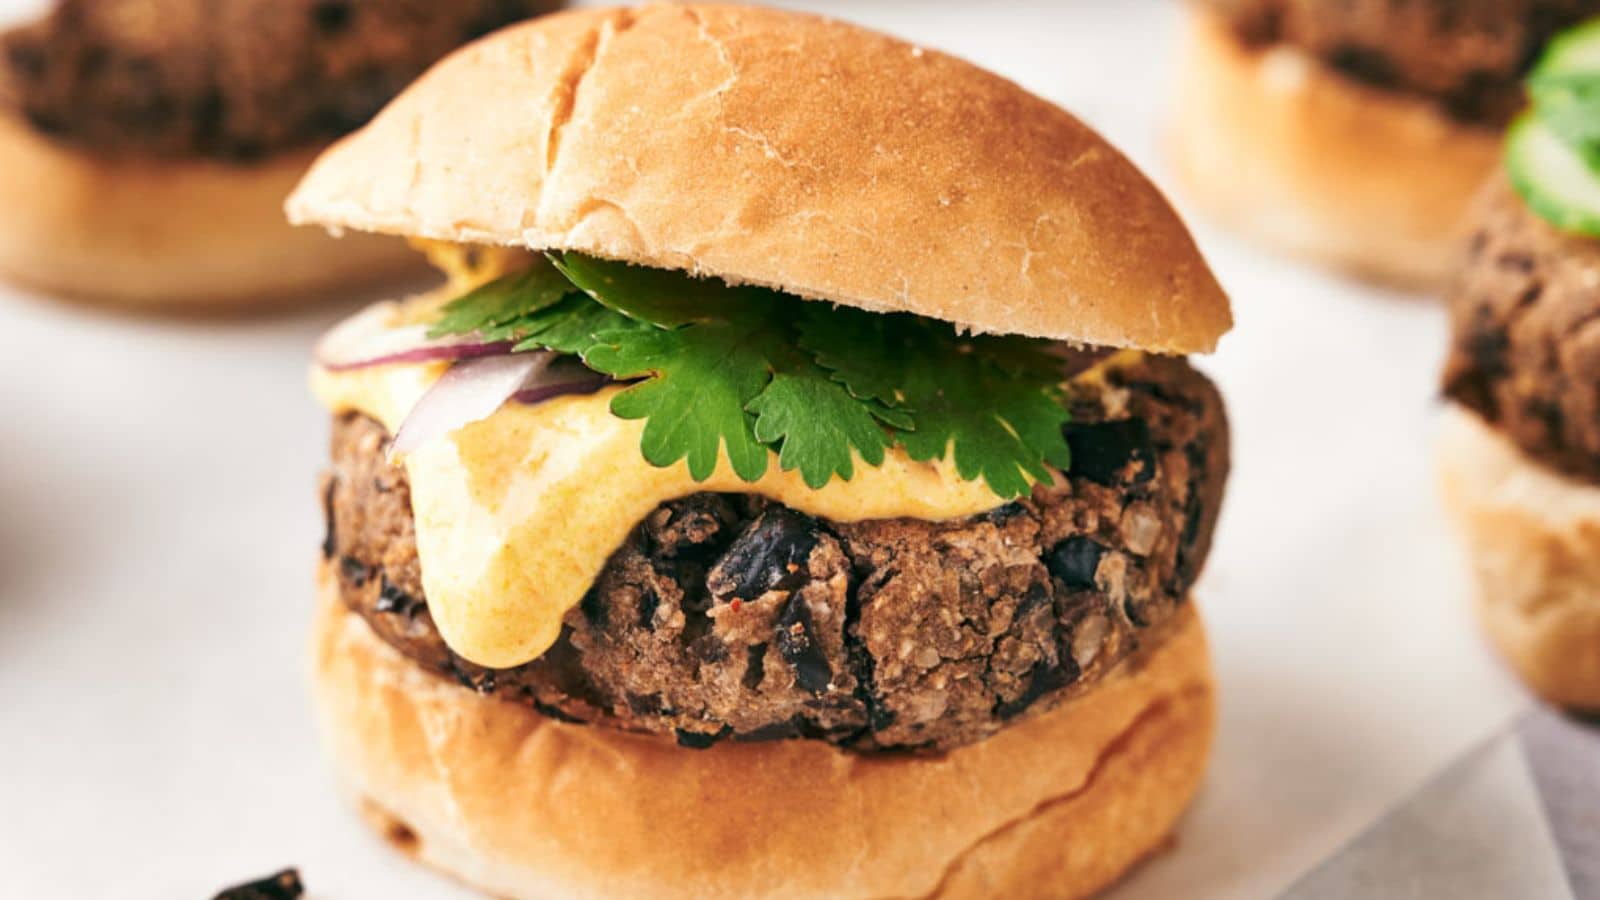 A black bean burger with a slice of cheese, cilantro, and red onion, served on a toasted bun.